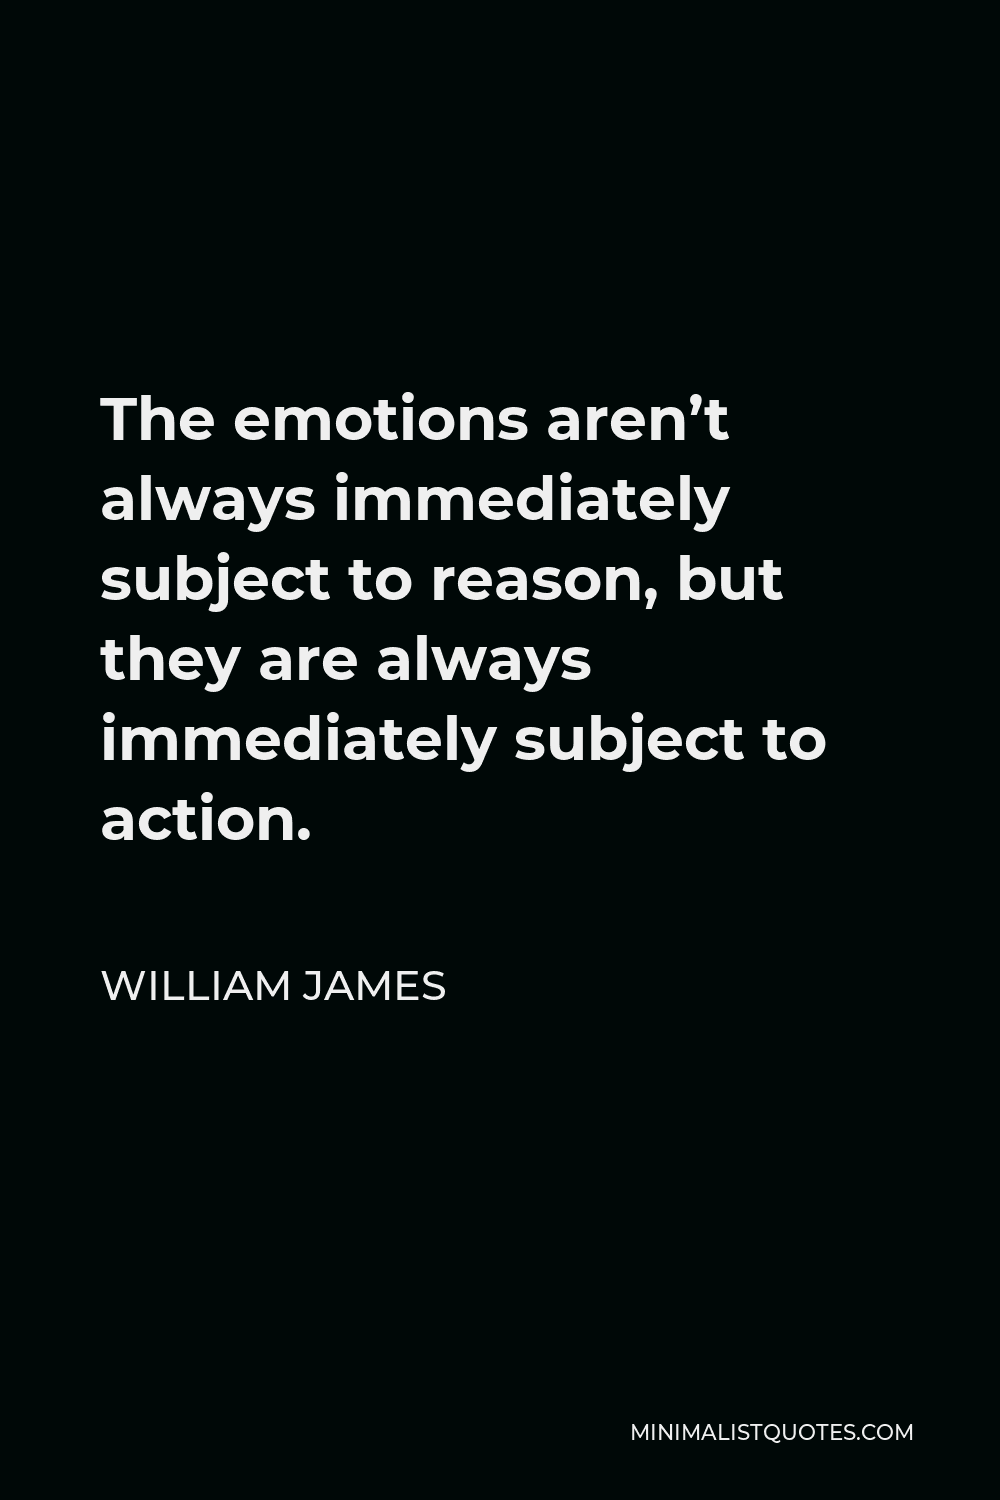 William James Quote - The emotions aren’t always immediately subject to reason, but they are always immediately subject to action.